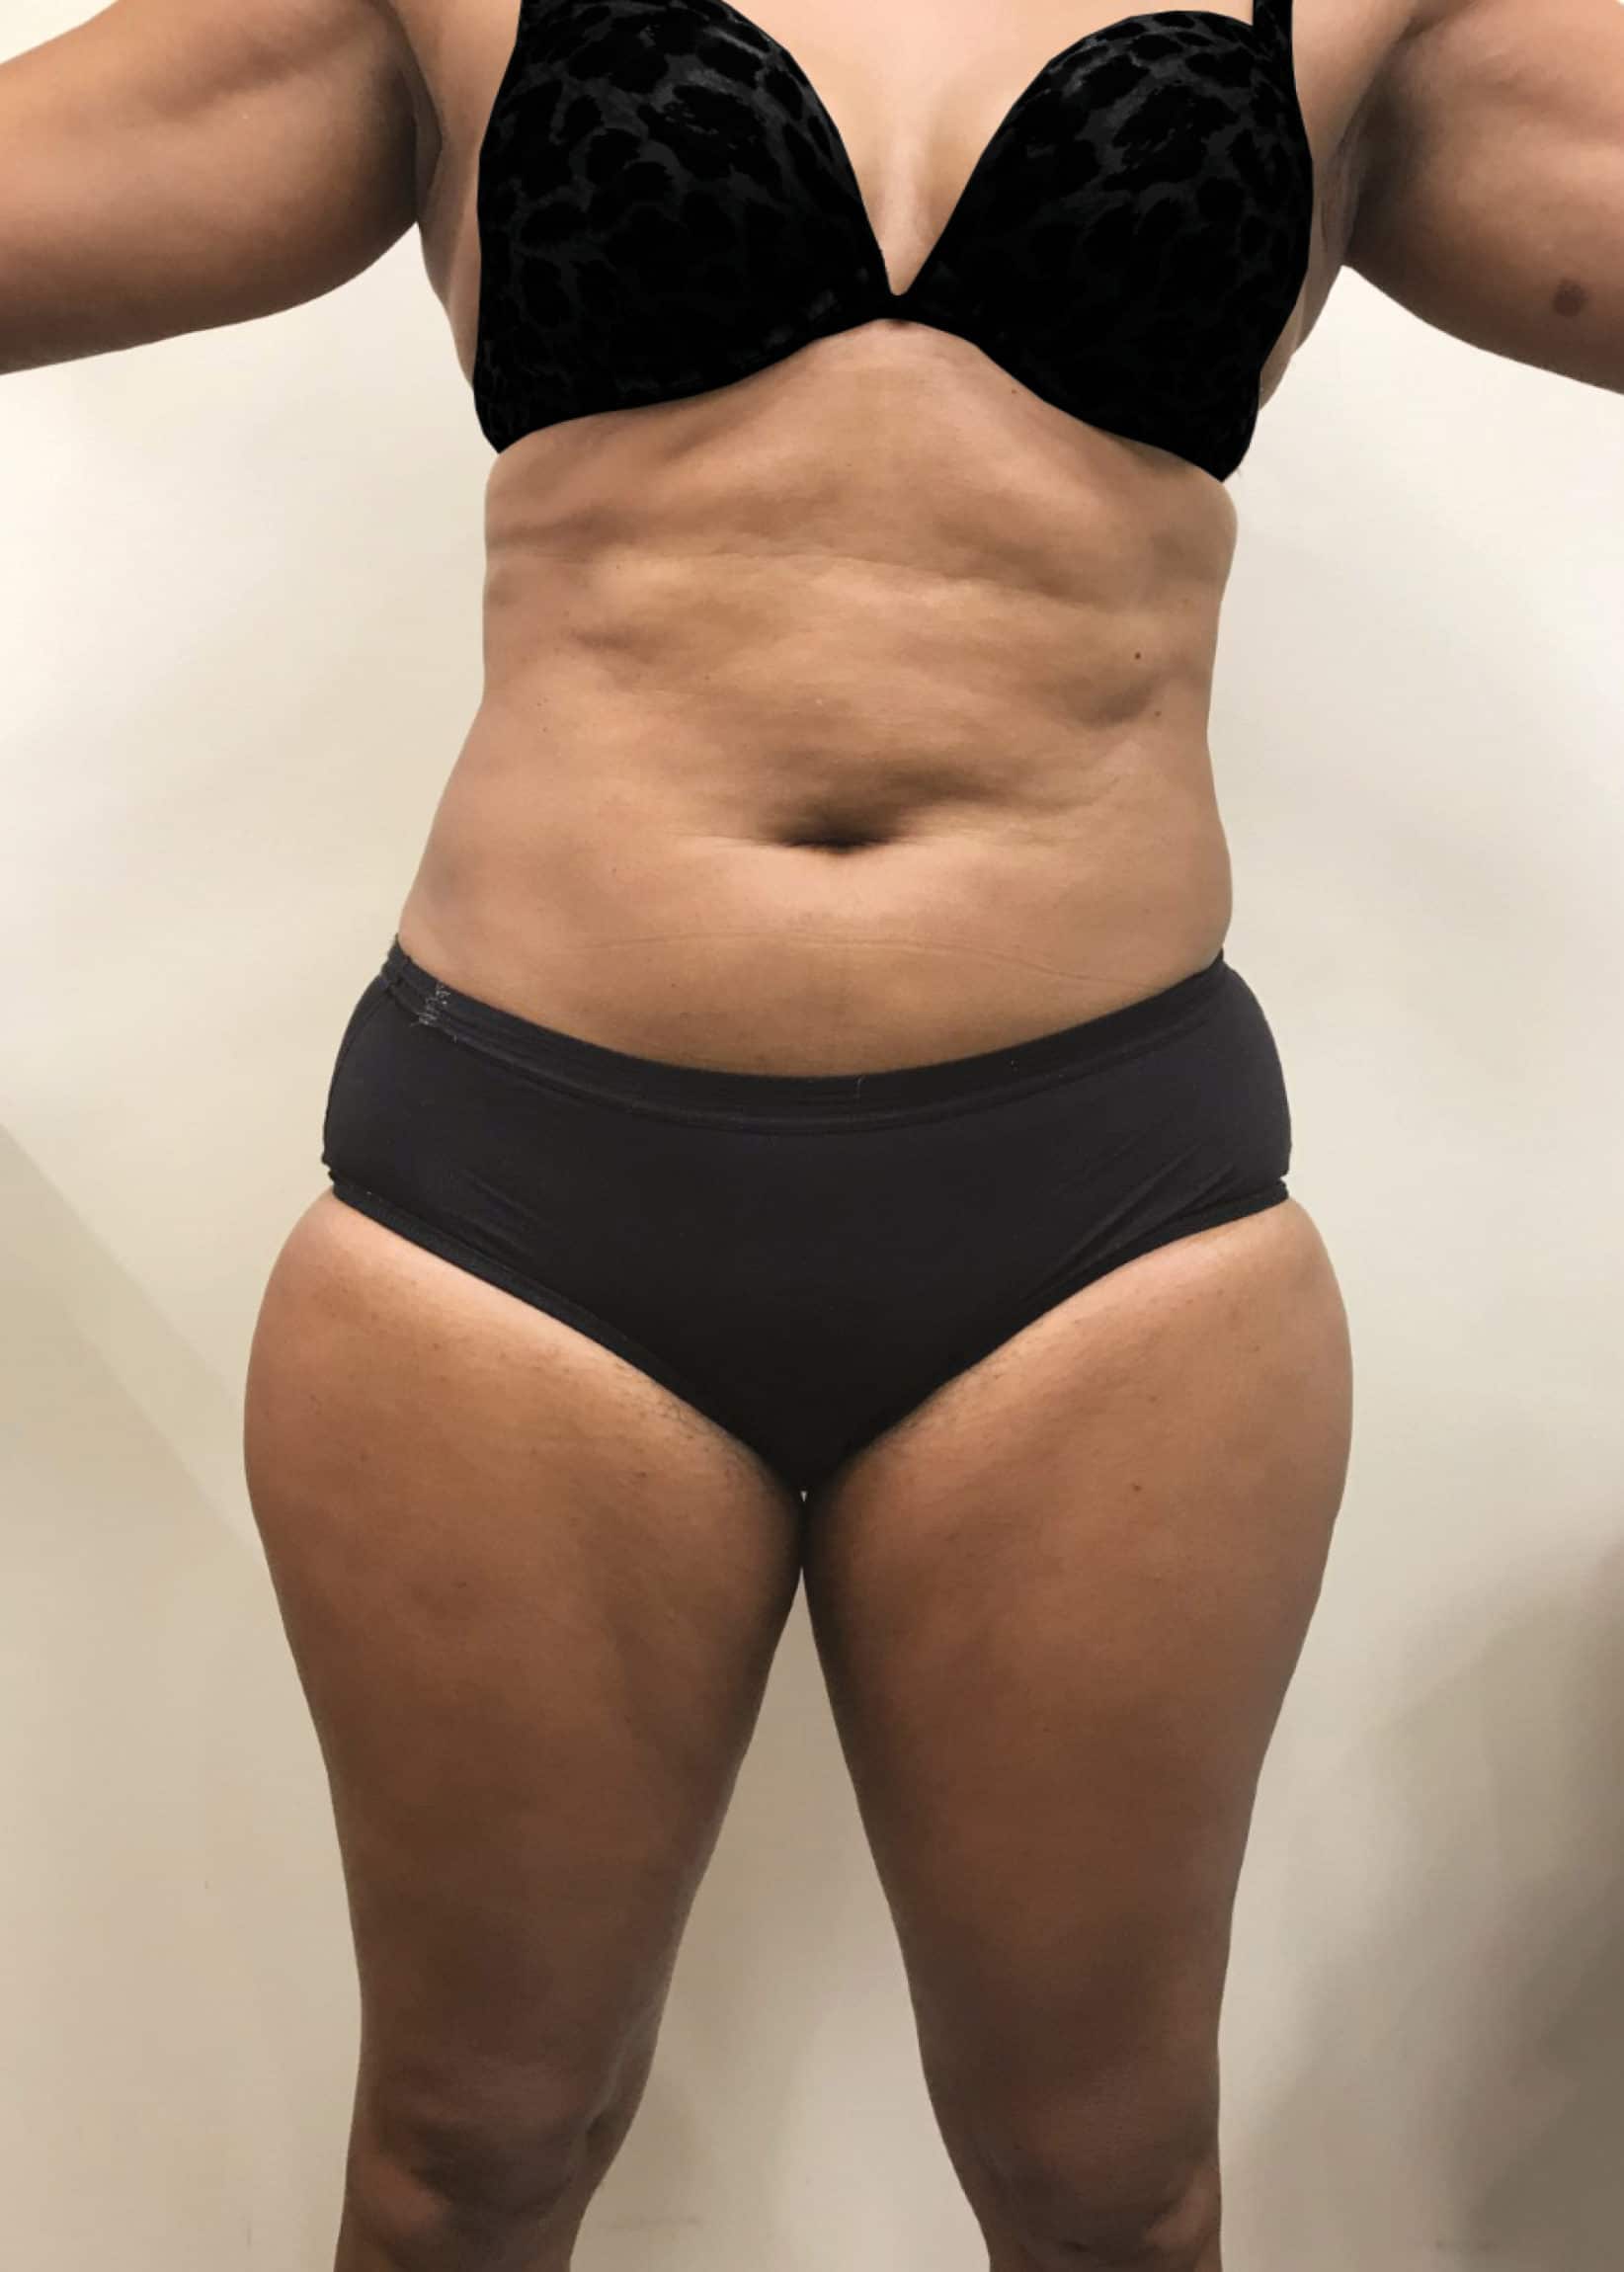 TheSkinCenter ProviderPages BrittanyOliver CoolSculpting After 1 scaled 1